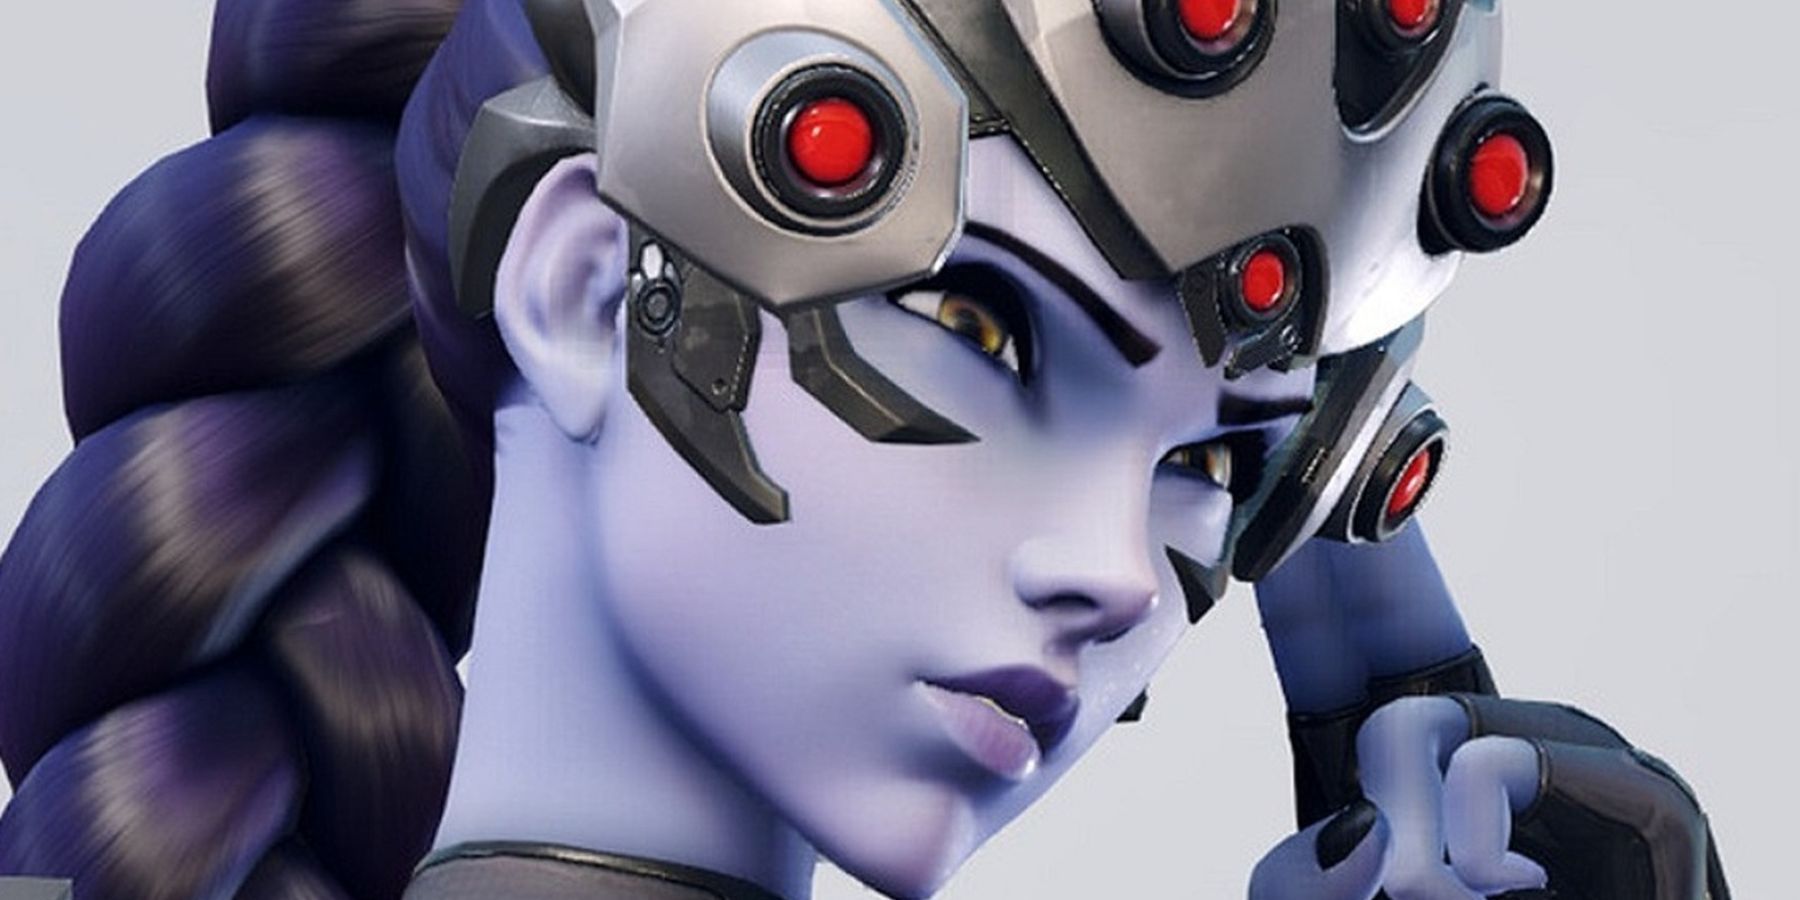 Overwatch 2: Widowmaker's Brainwashing Could Be A Key Part of The